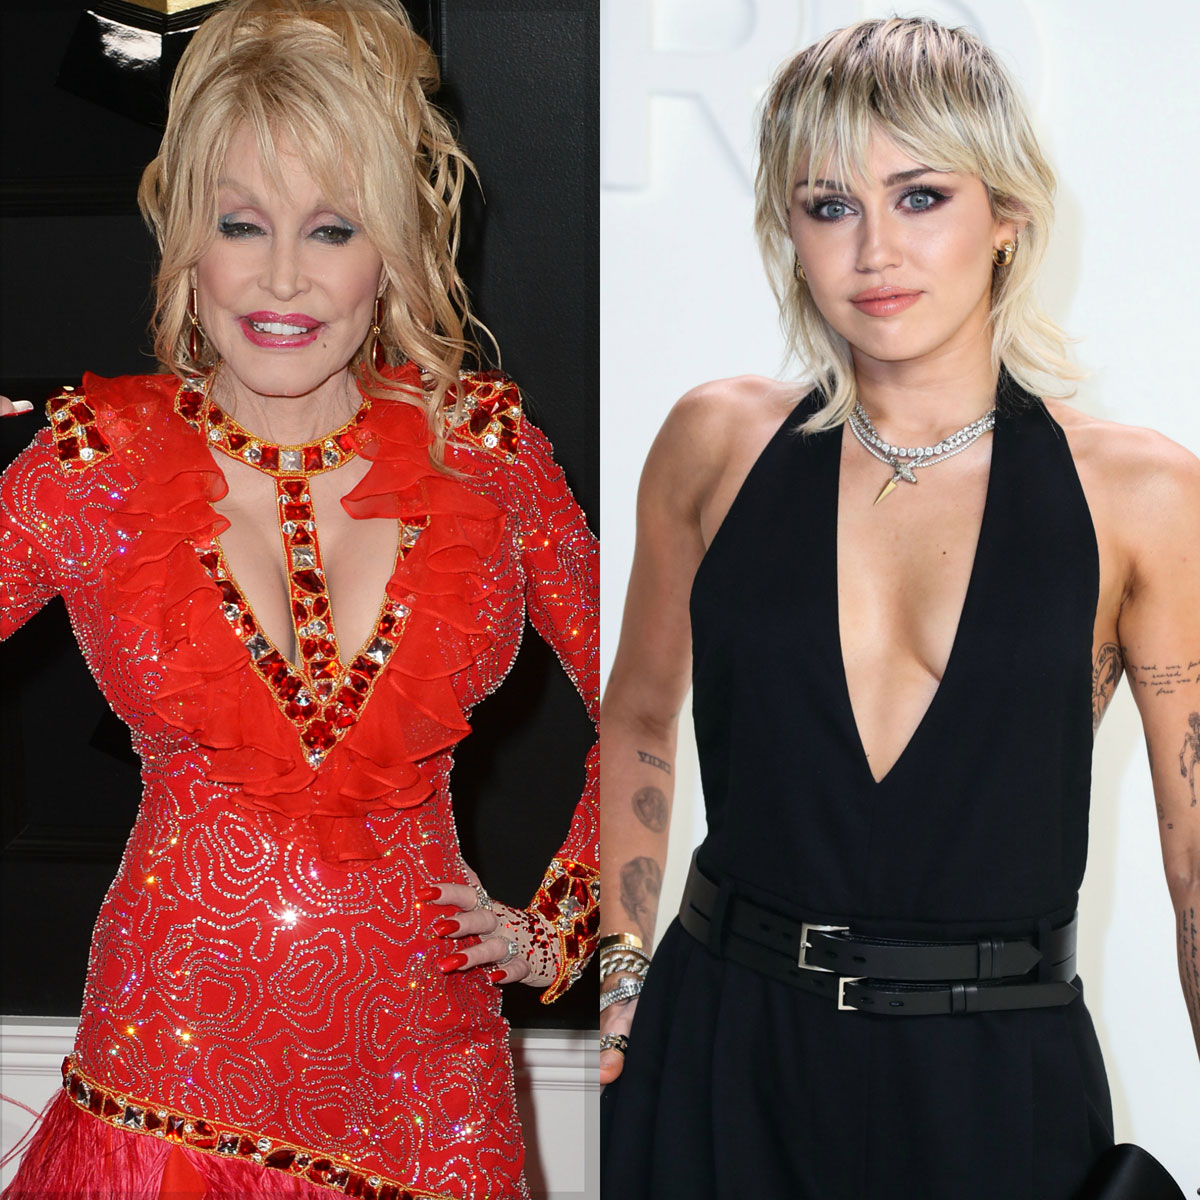 Dolly Parton and Miley Cyrus are related